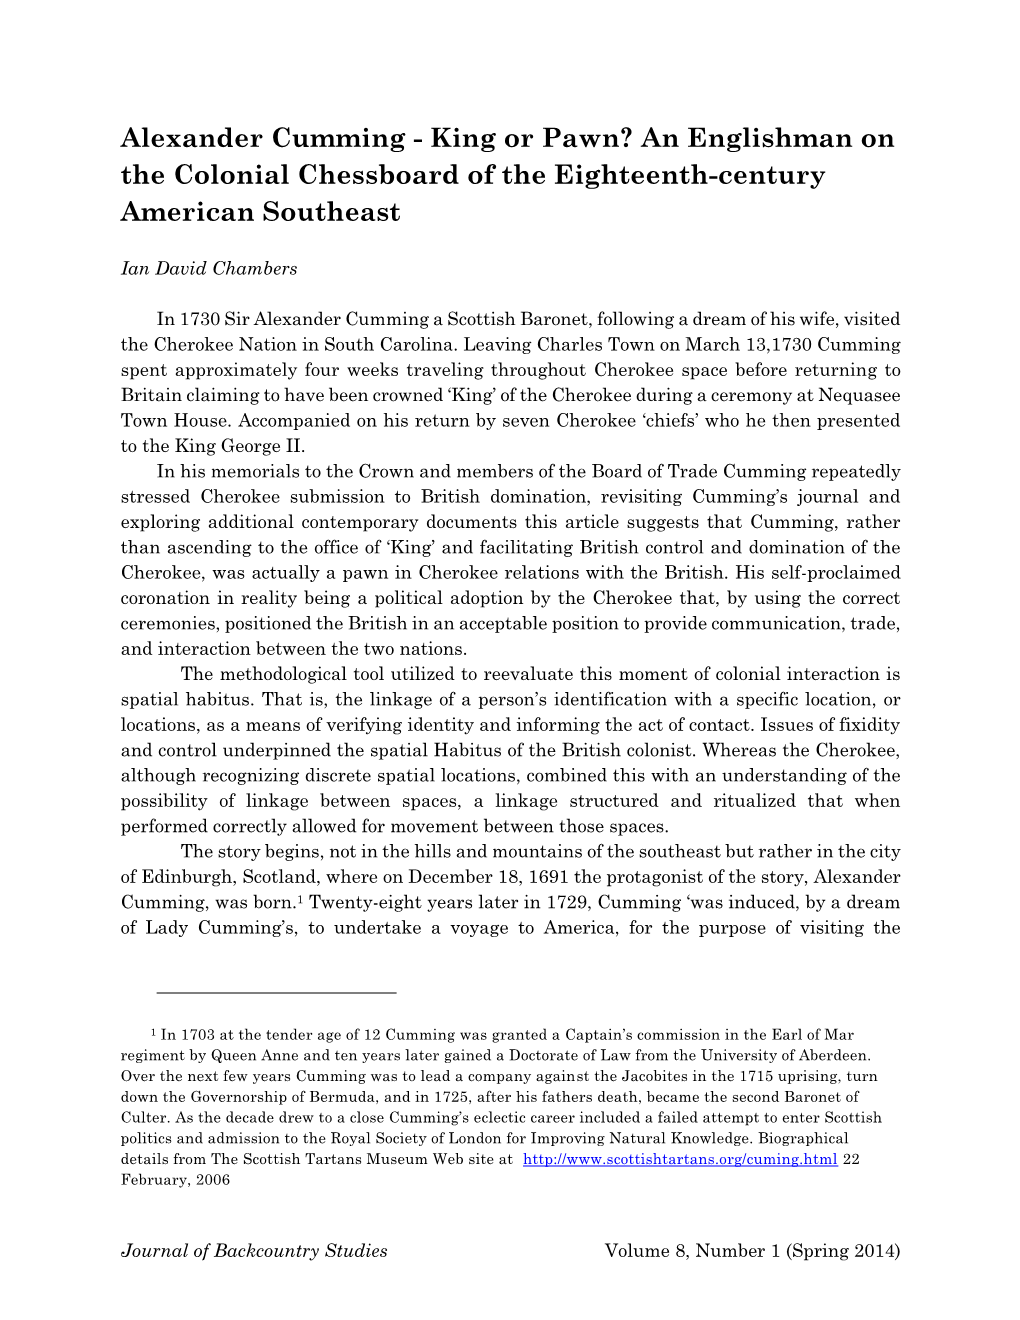 Alexander Cumming - King Or Pawn? an Englishman on the Colonial Chessboard of the Eighteenth-Century American Southeast